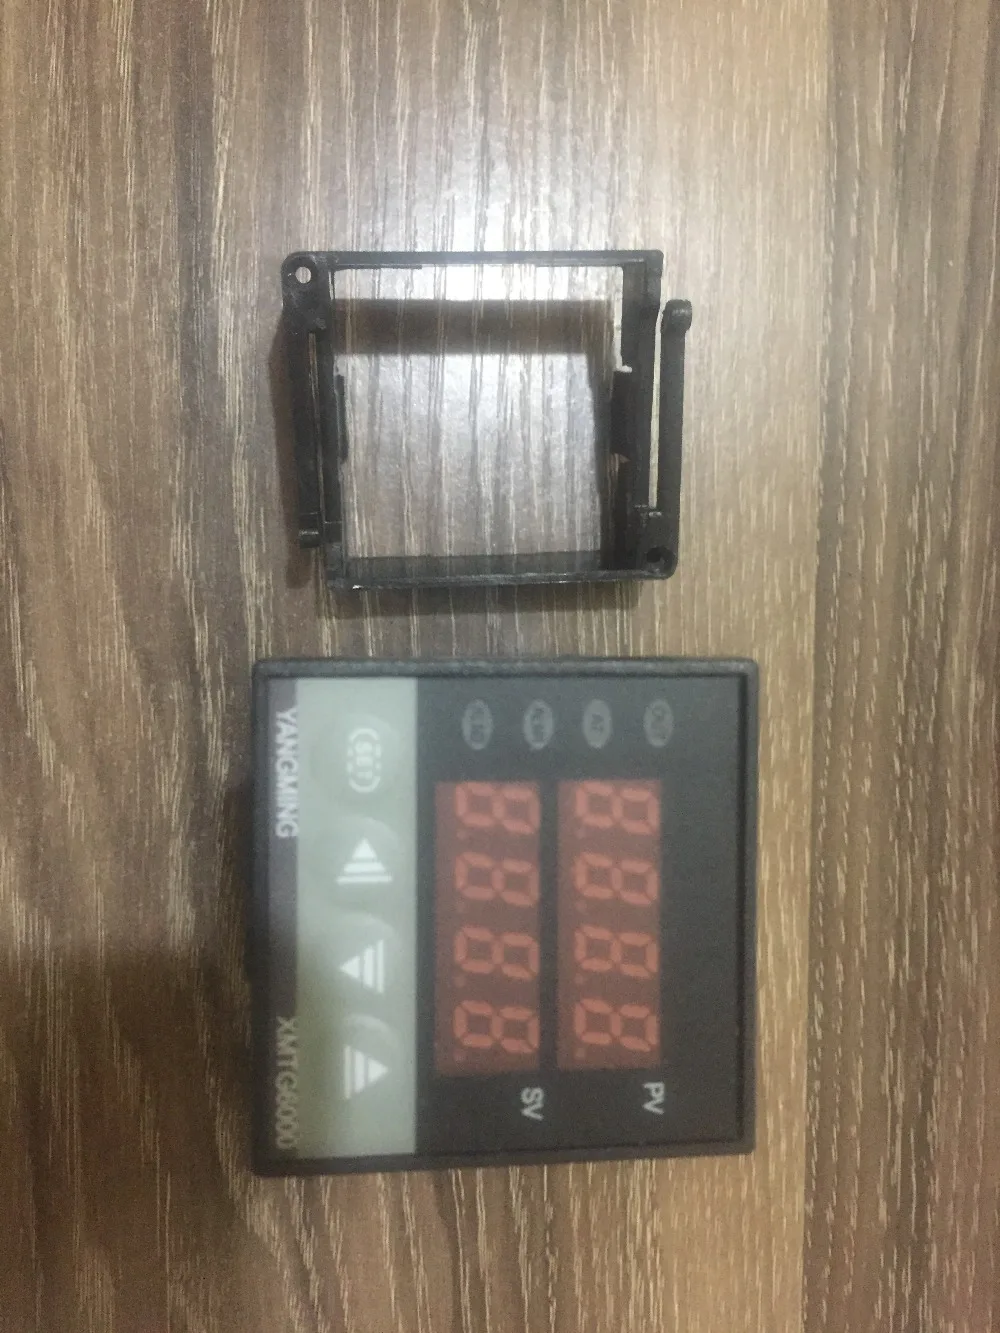 Details about   1pcs new XMTG-633 YANGMING thermostat 